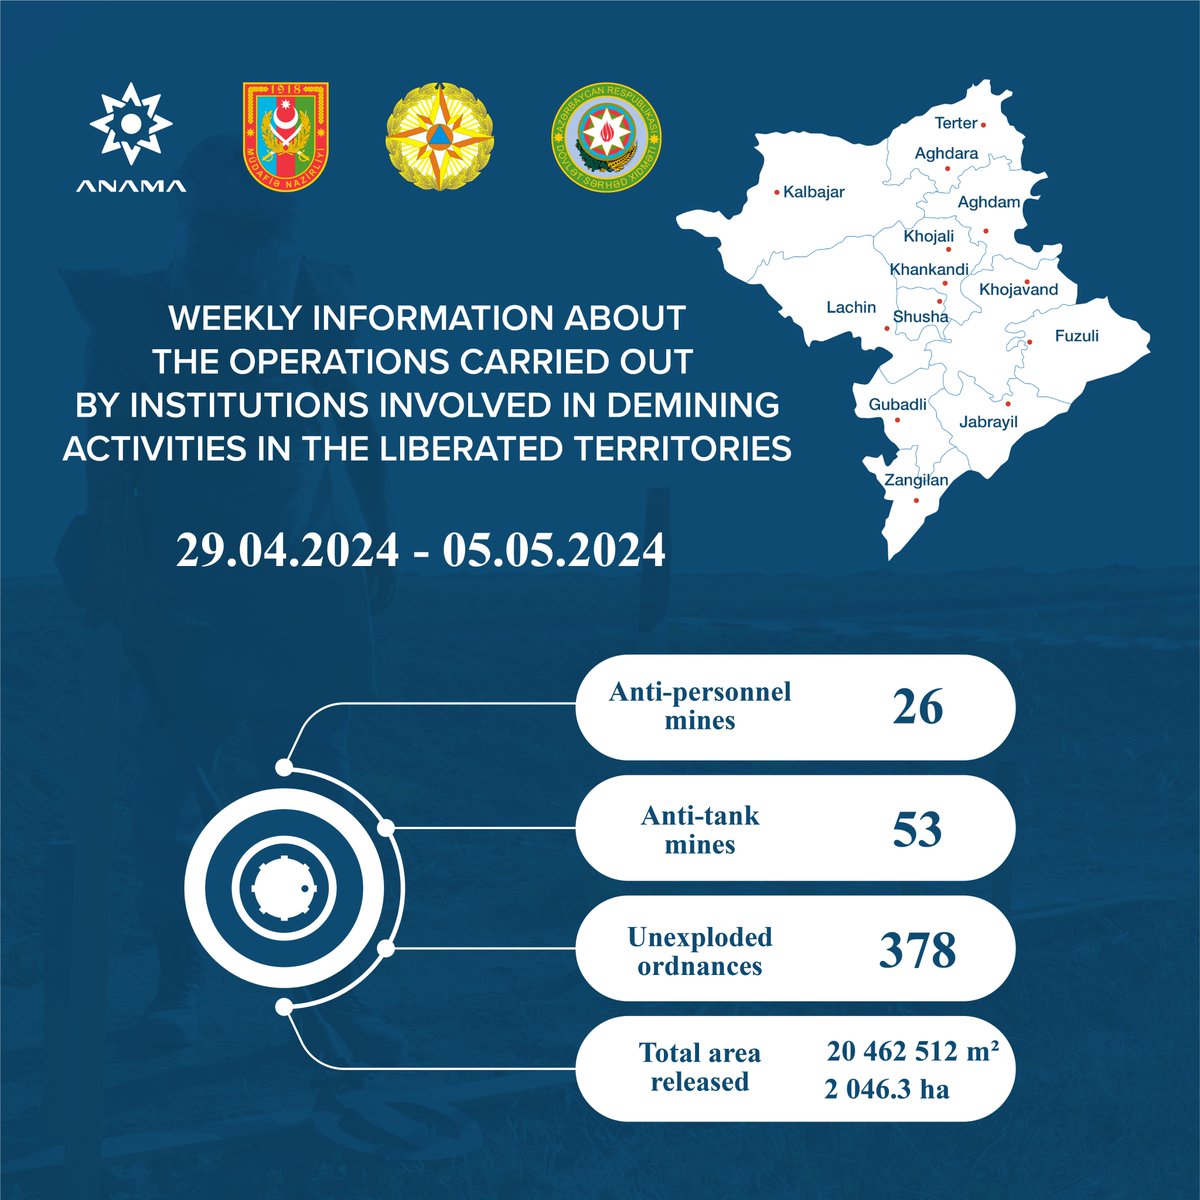 Weekly information about operations carried out by institutions involved in demining activities in the liberated territories (29.04.2024 - 05.05.2024)

#ANAMA #MineAwareness #MineAction #LandmineSafety #Azerbaijan #Karabakh